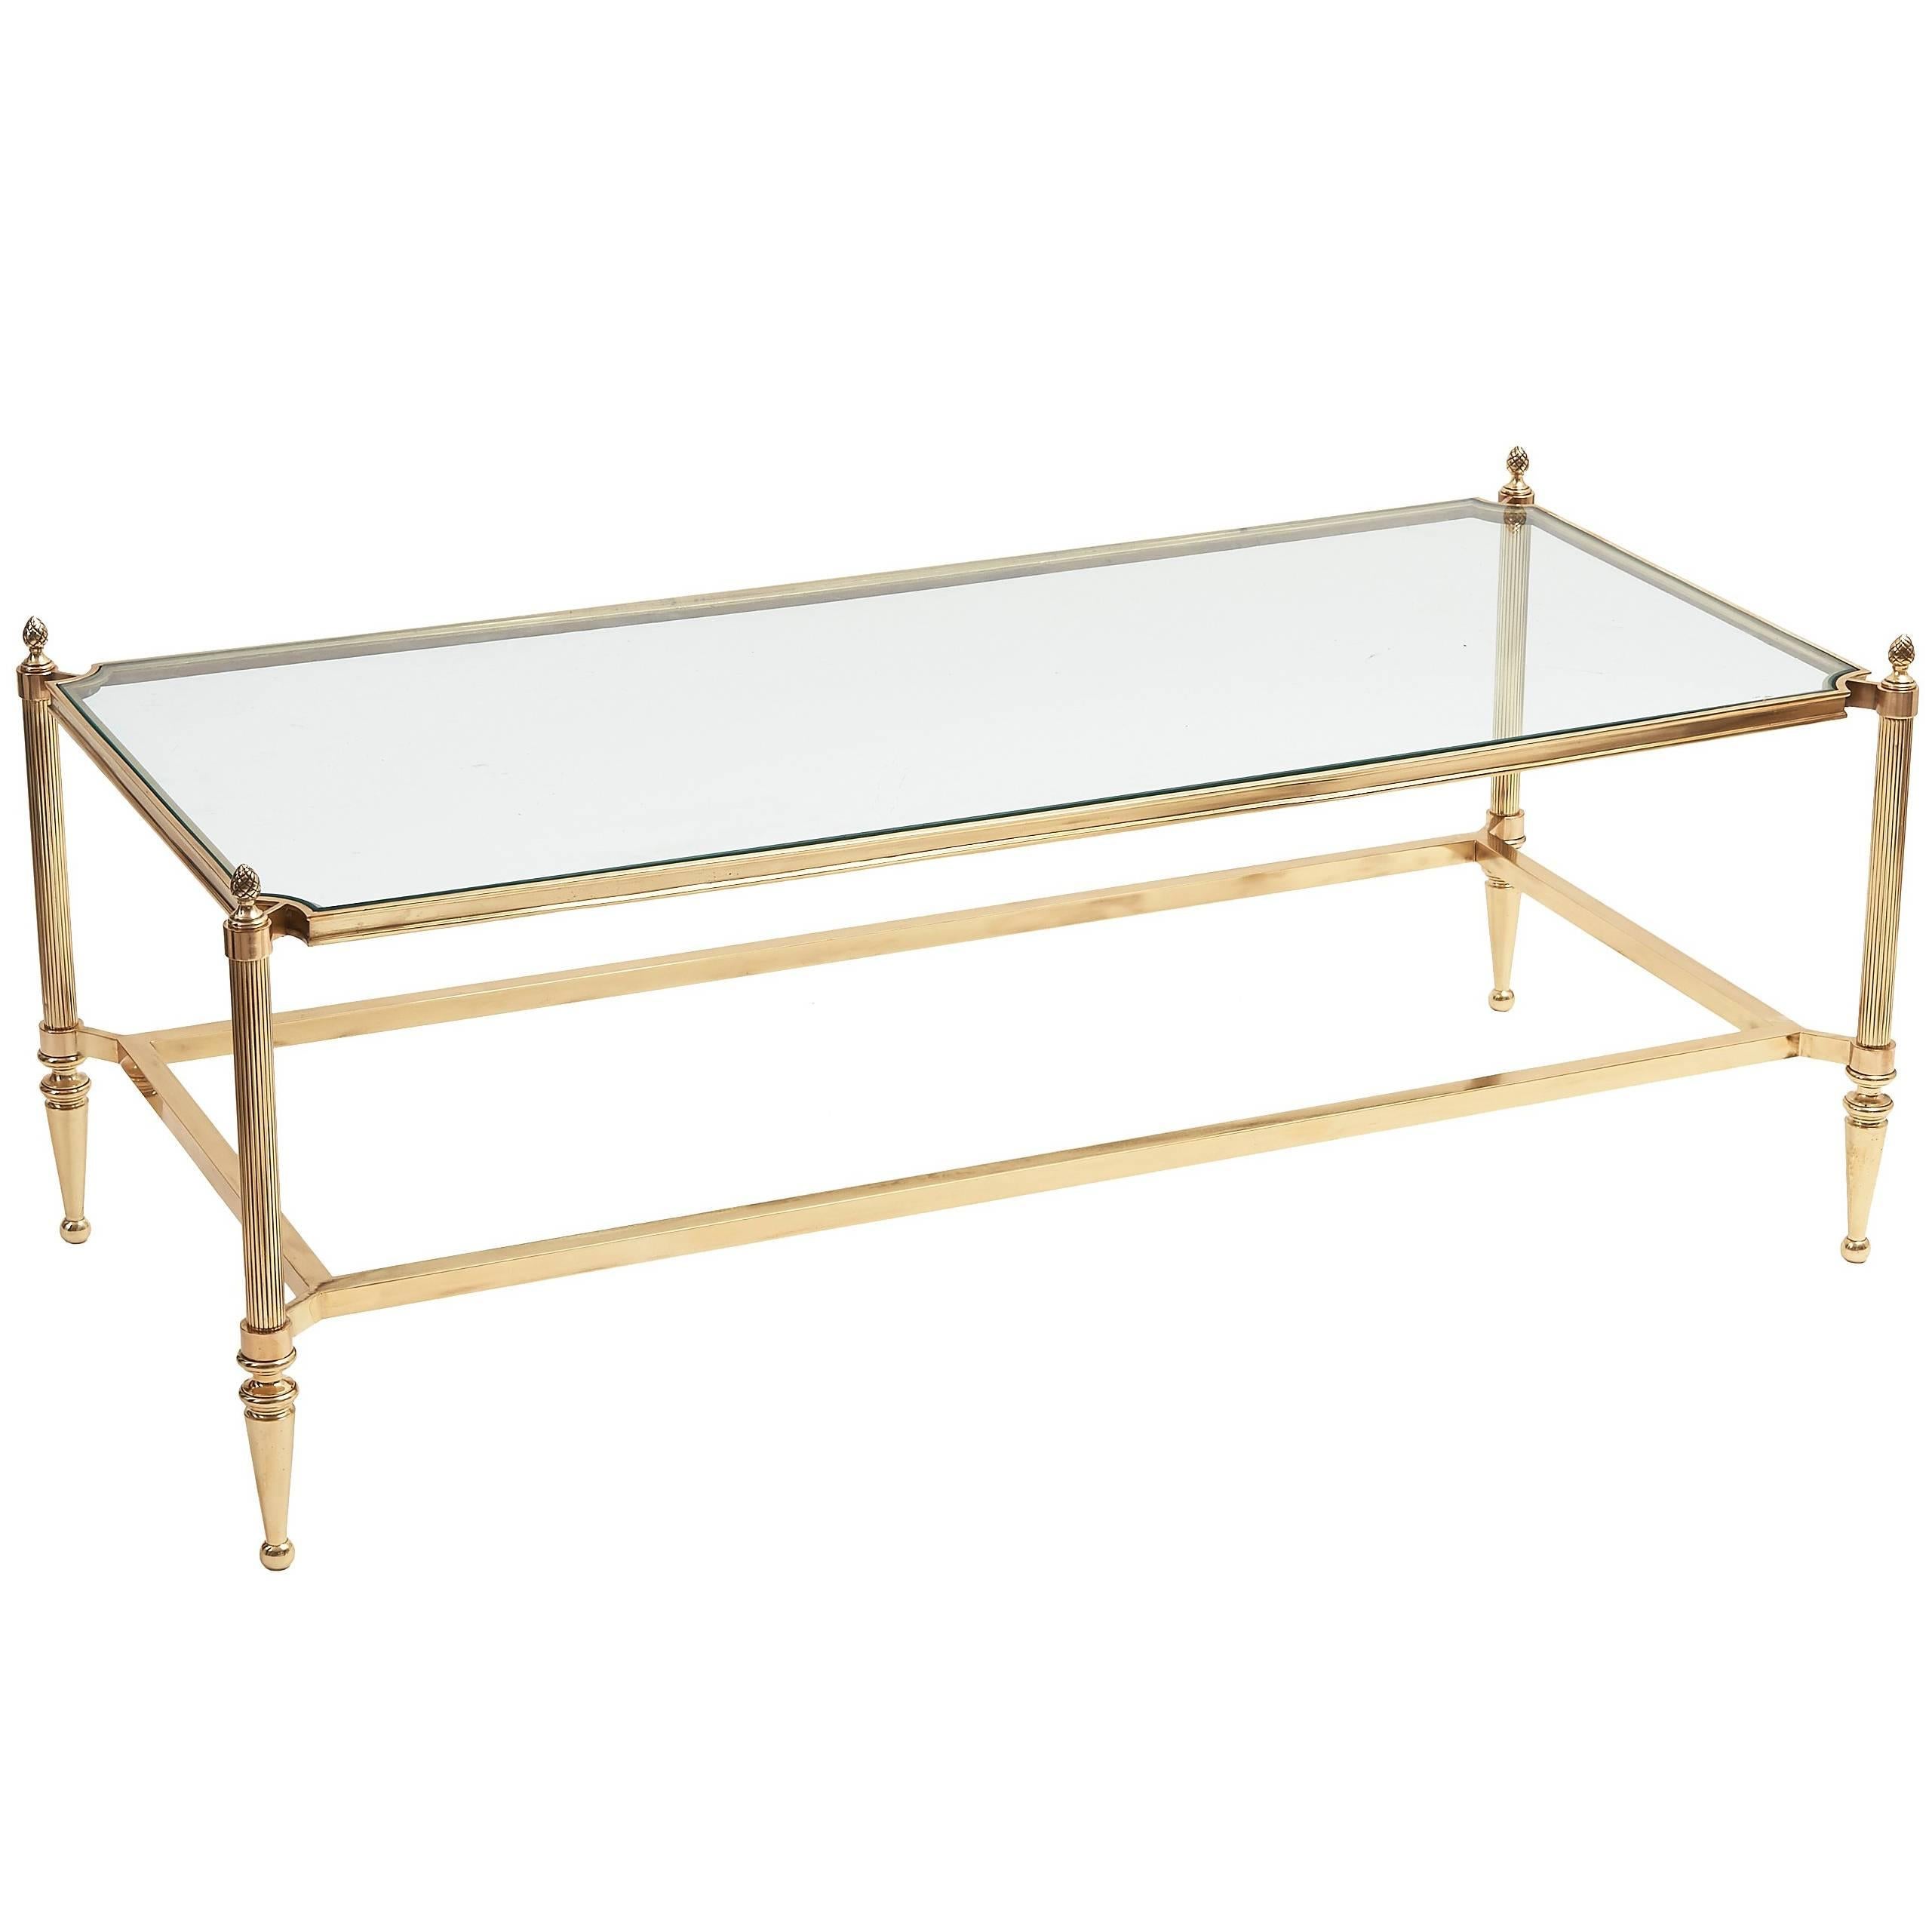 French Rectangular Brass and Glass Coffee Table with Acorn Finials, circa 1960